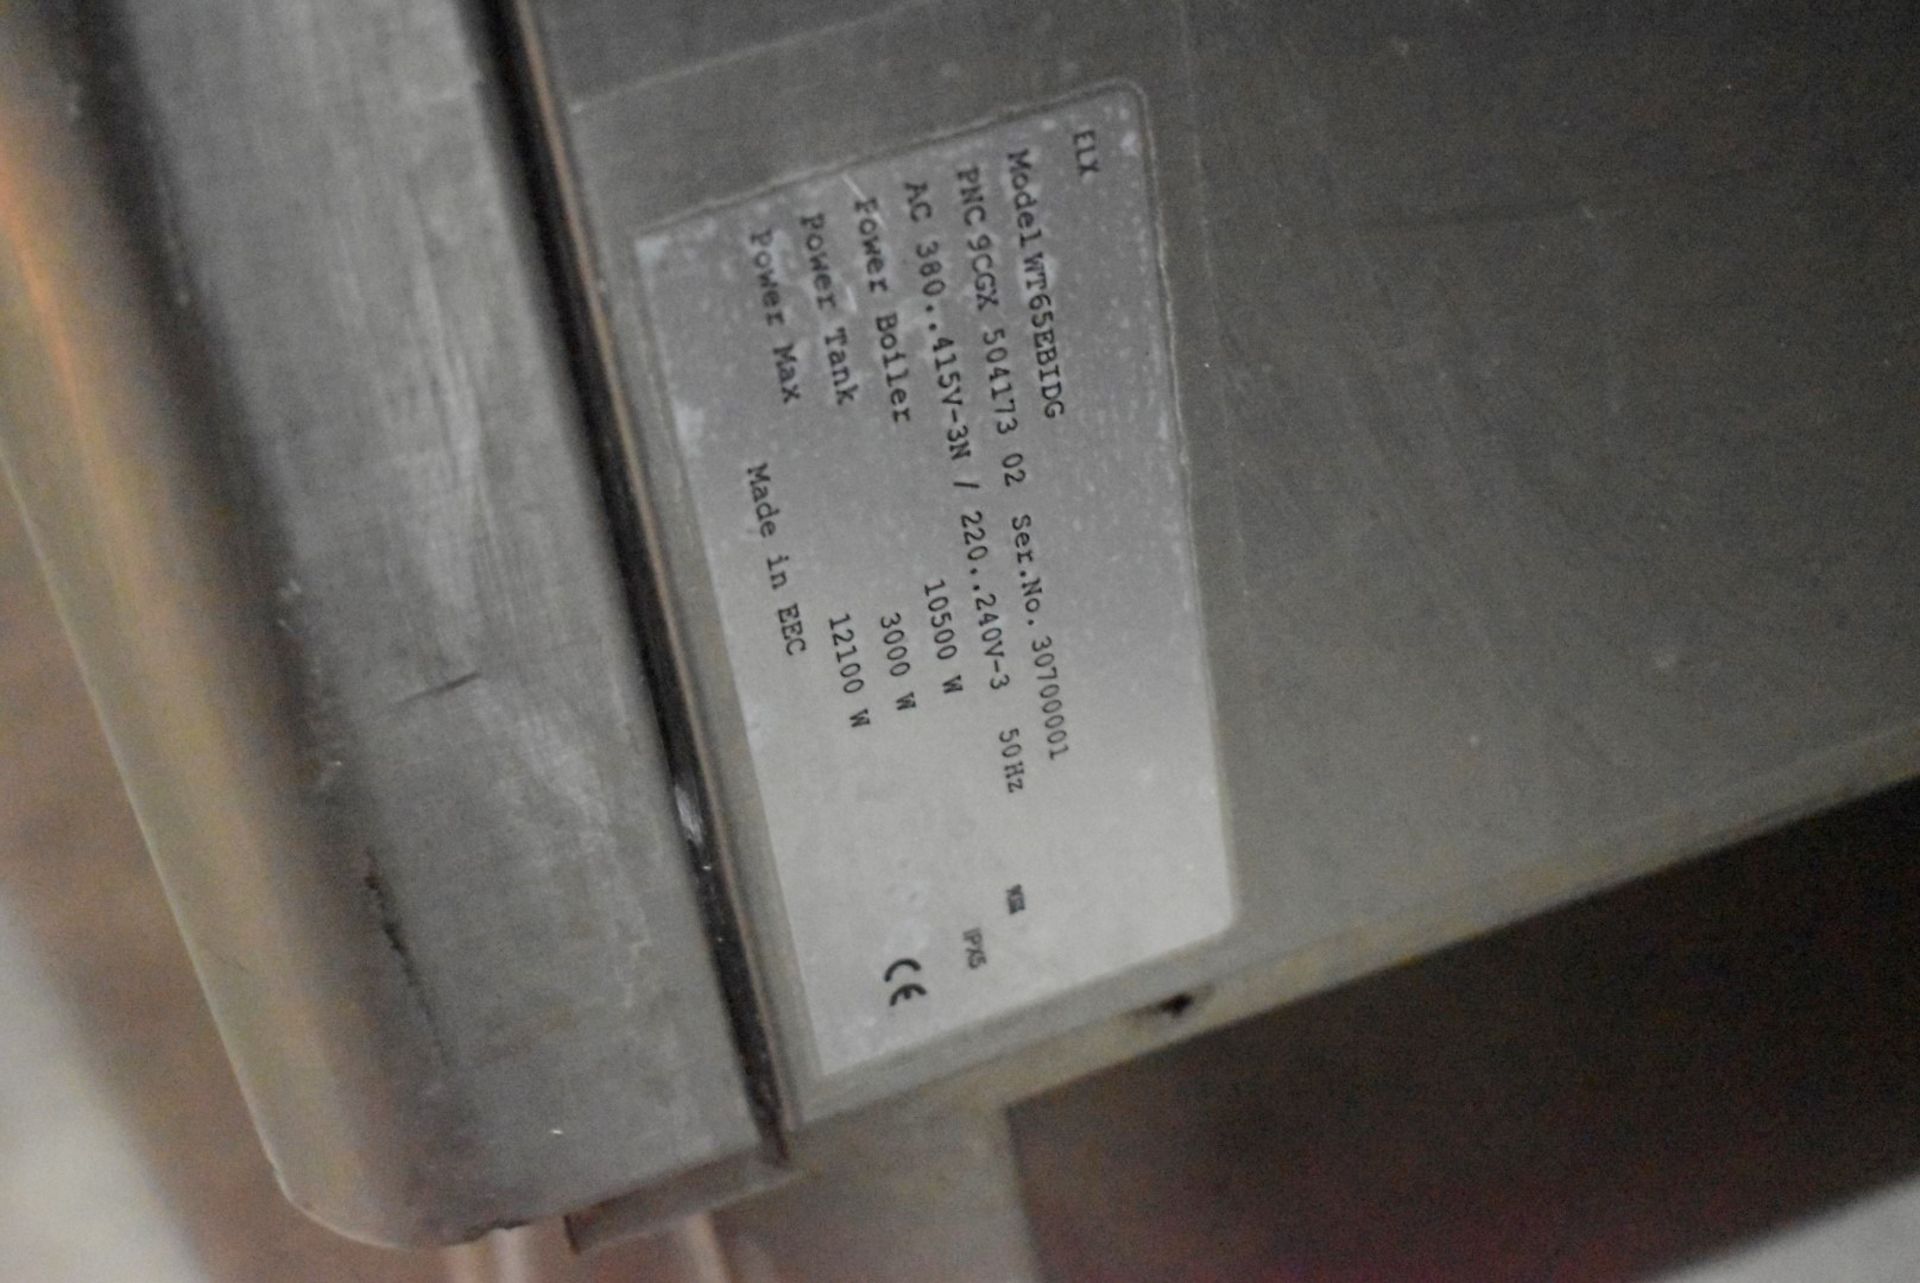 1 x Electrolux Passthrough Commercial Dishwasher - Model WT65EBIDG - 3 Phase - CL232 - Removed - Image 5 of 17